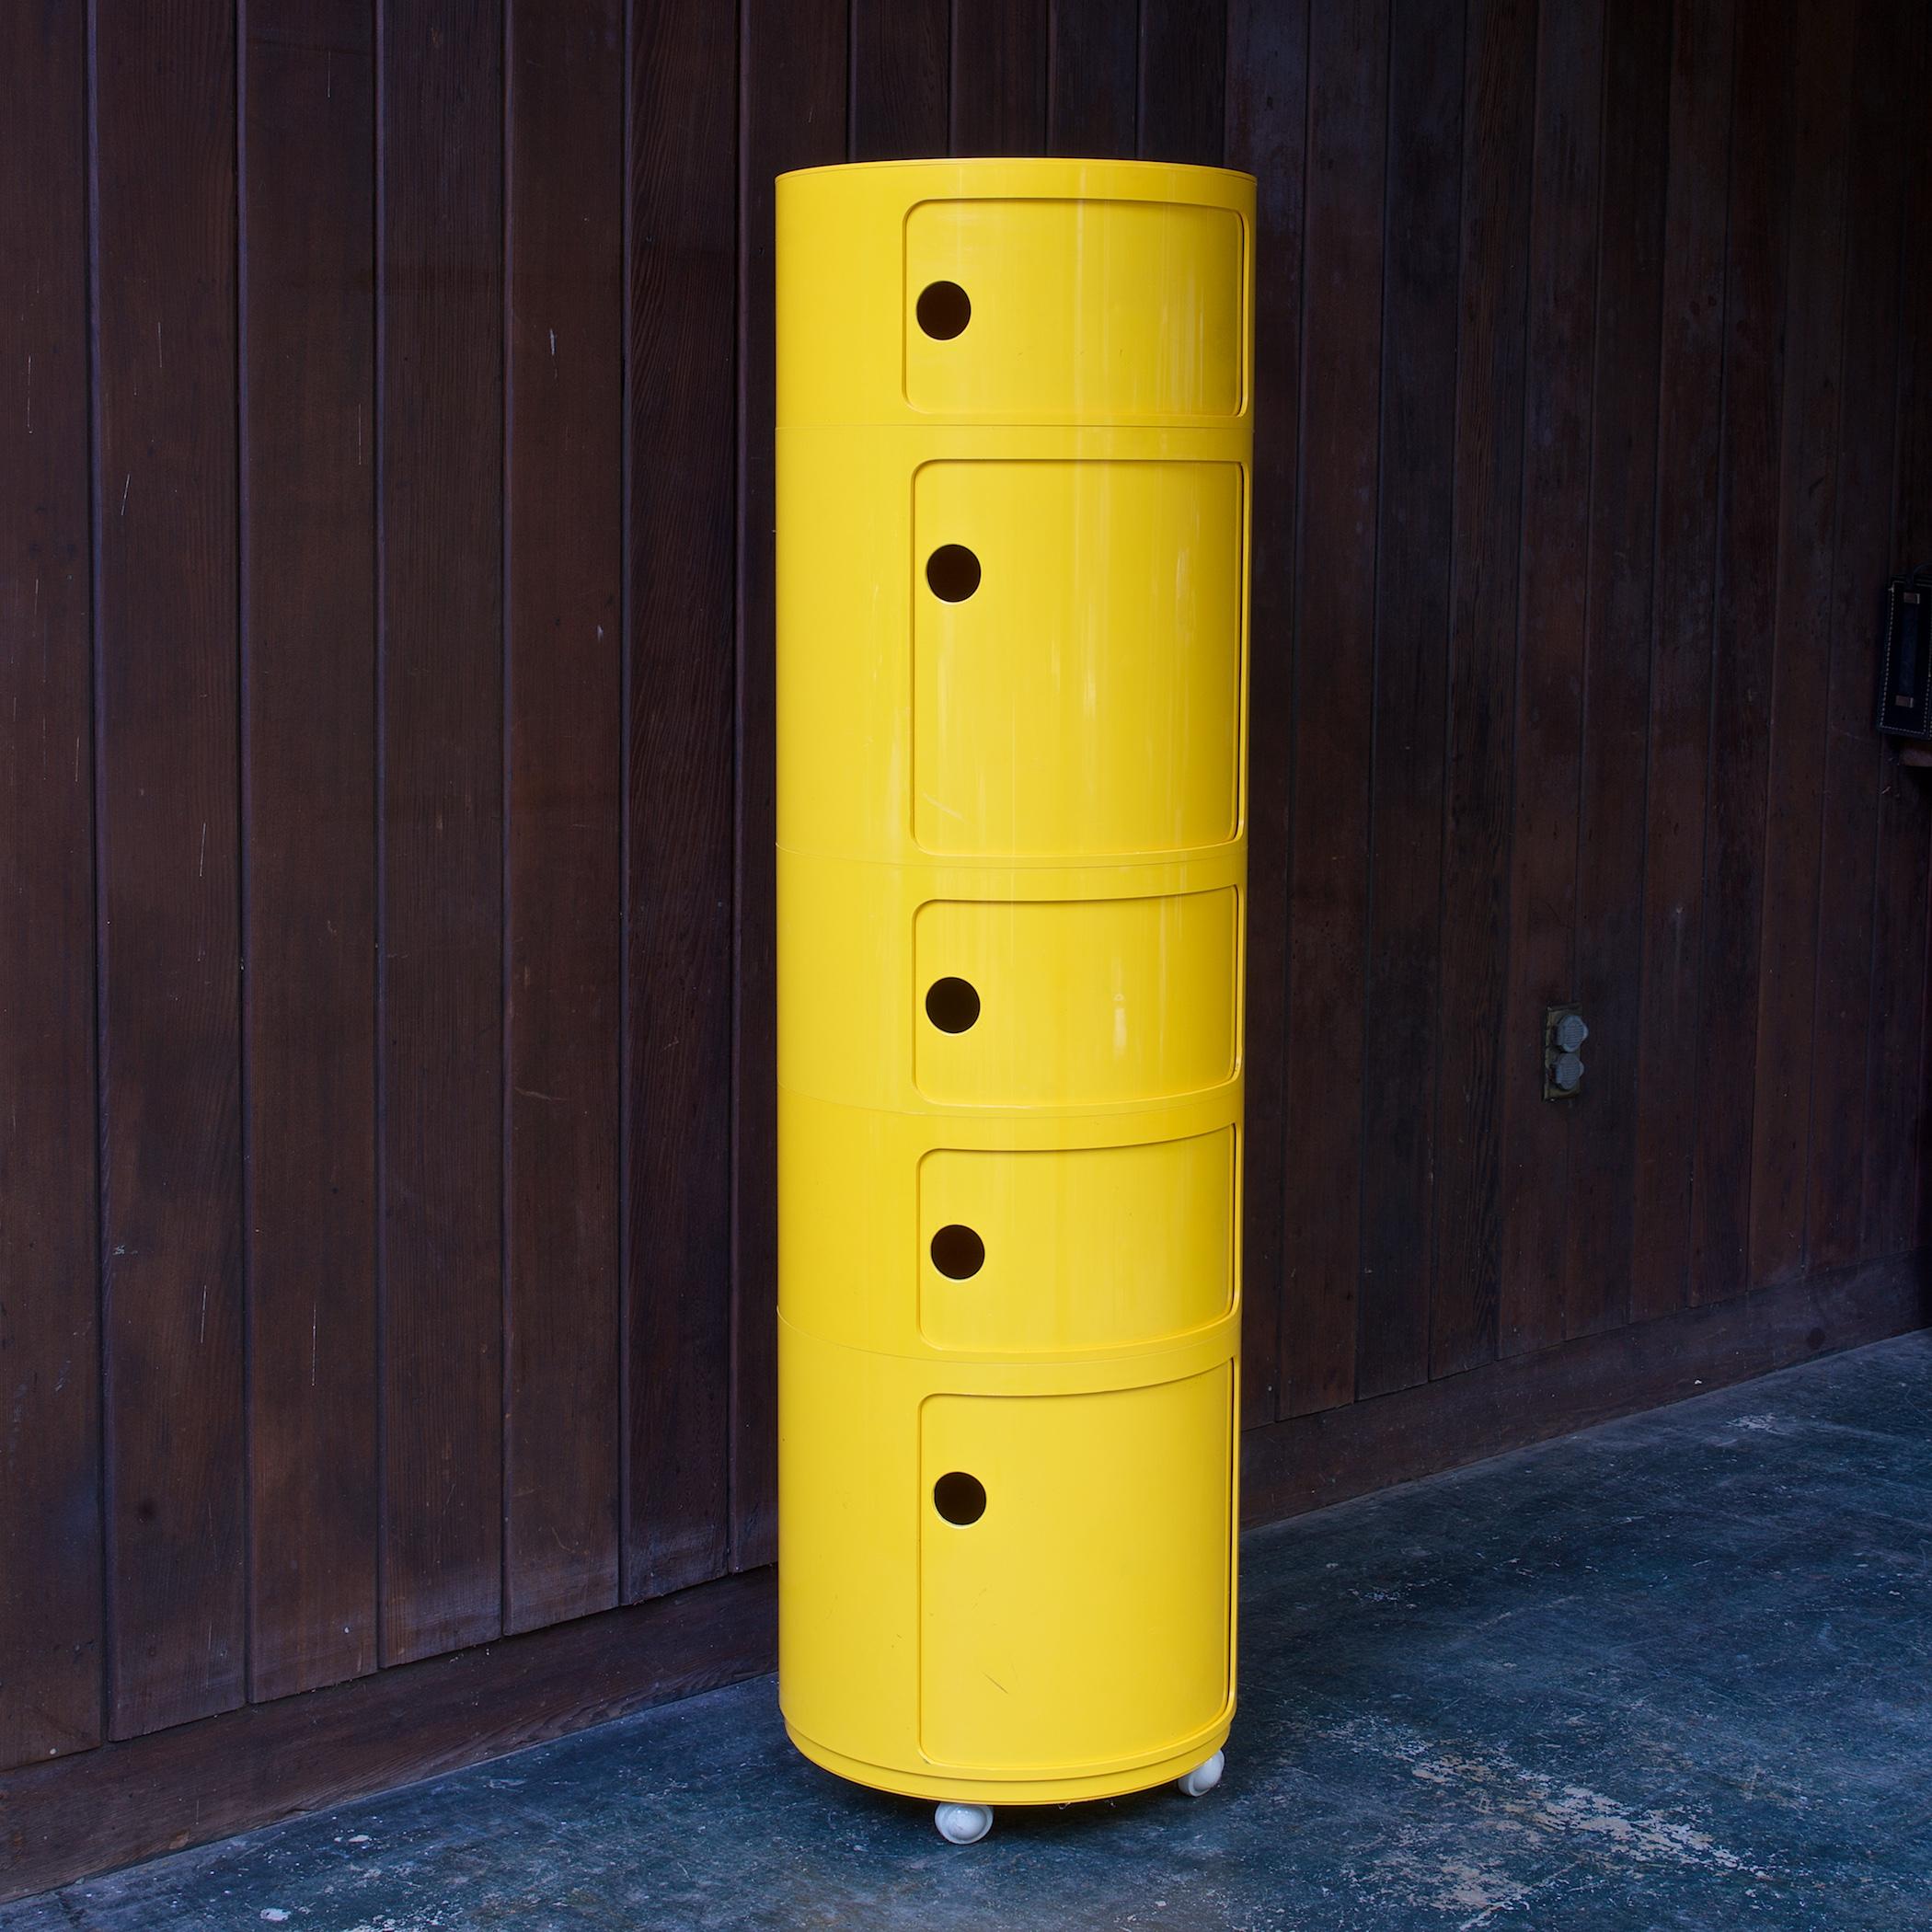 1970s original production Componibili storage units in bright primary yellow by Anna Castelli for Kartell, Beylerian, ltd.  5-tier stack with sliding doors on casters.

Includes:
(2) Tall Units Each with Dia 16.5 x H 15 1/8 in.
(3) Short Unit Dia